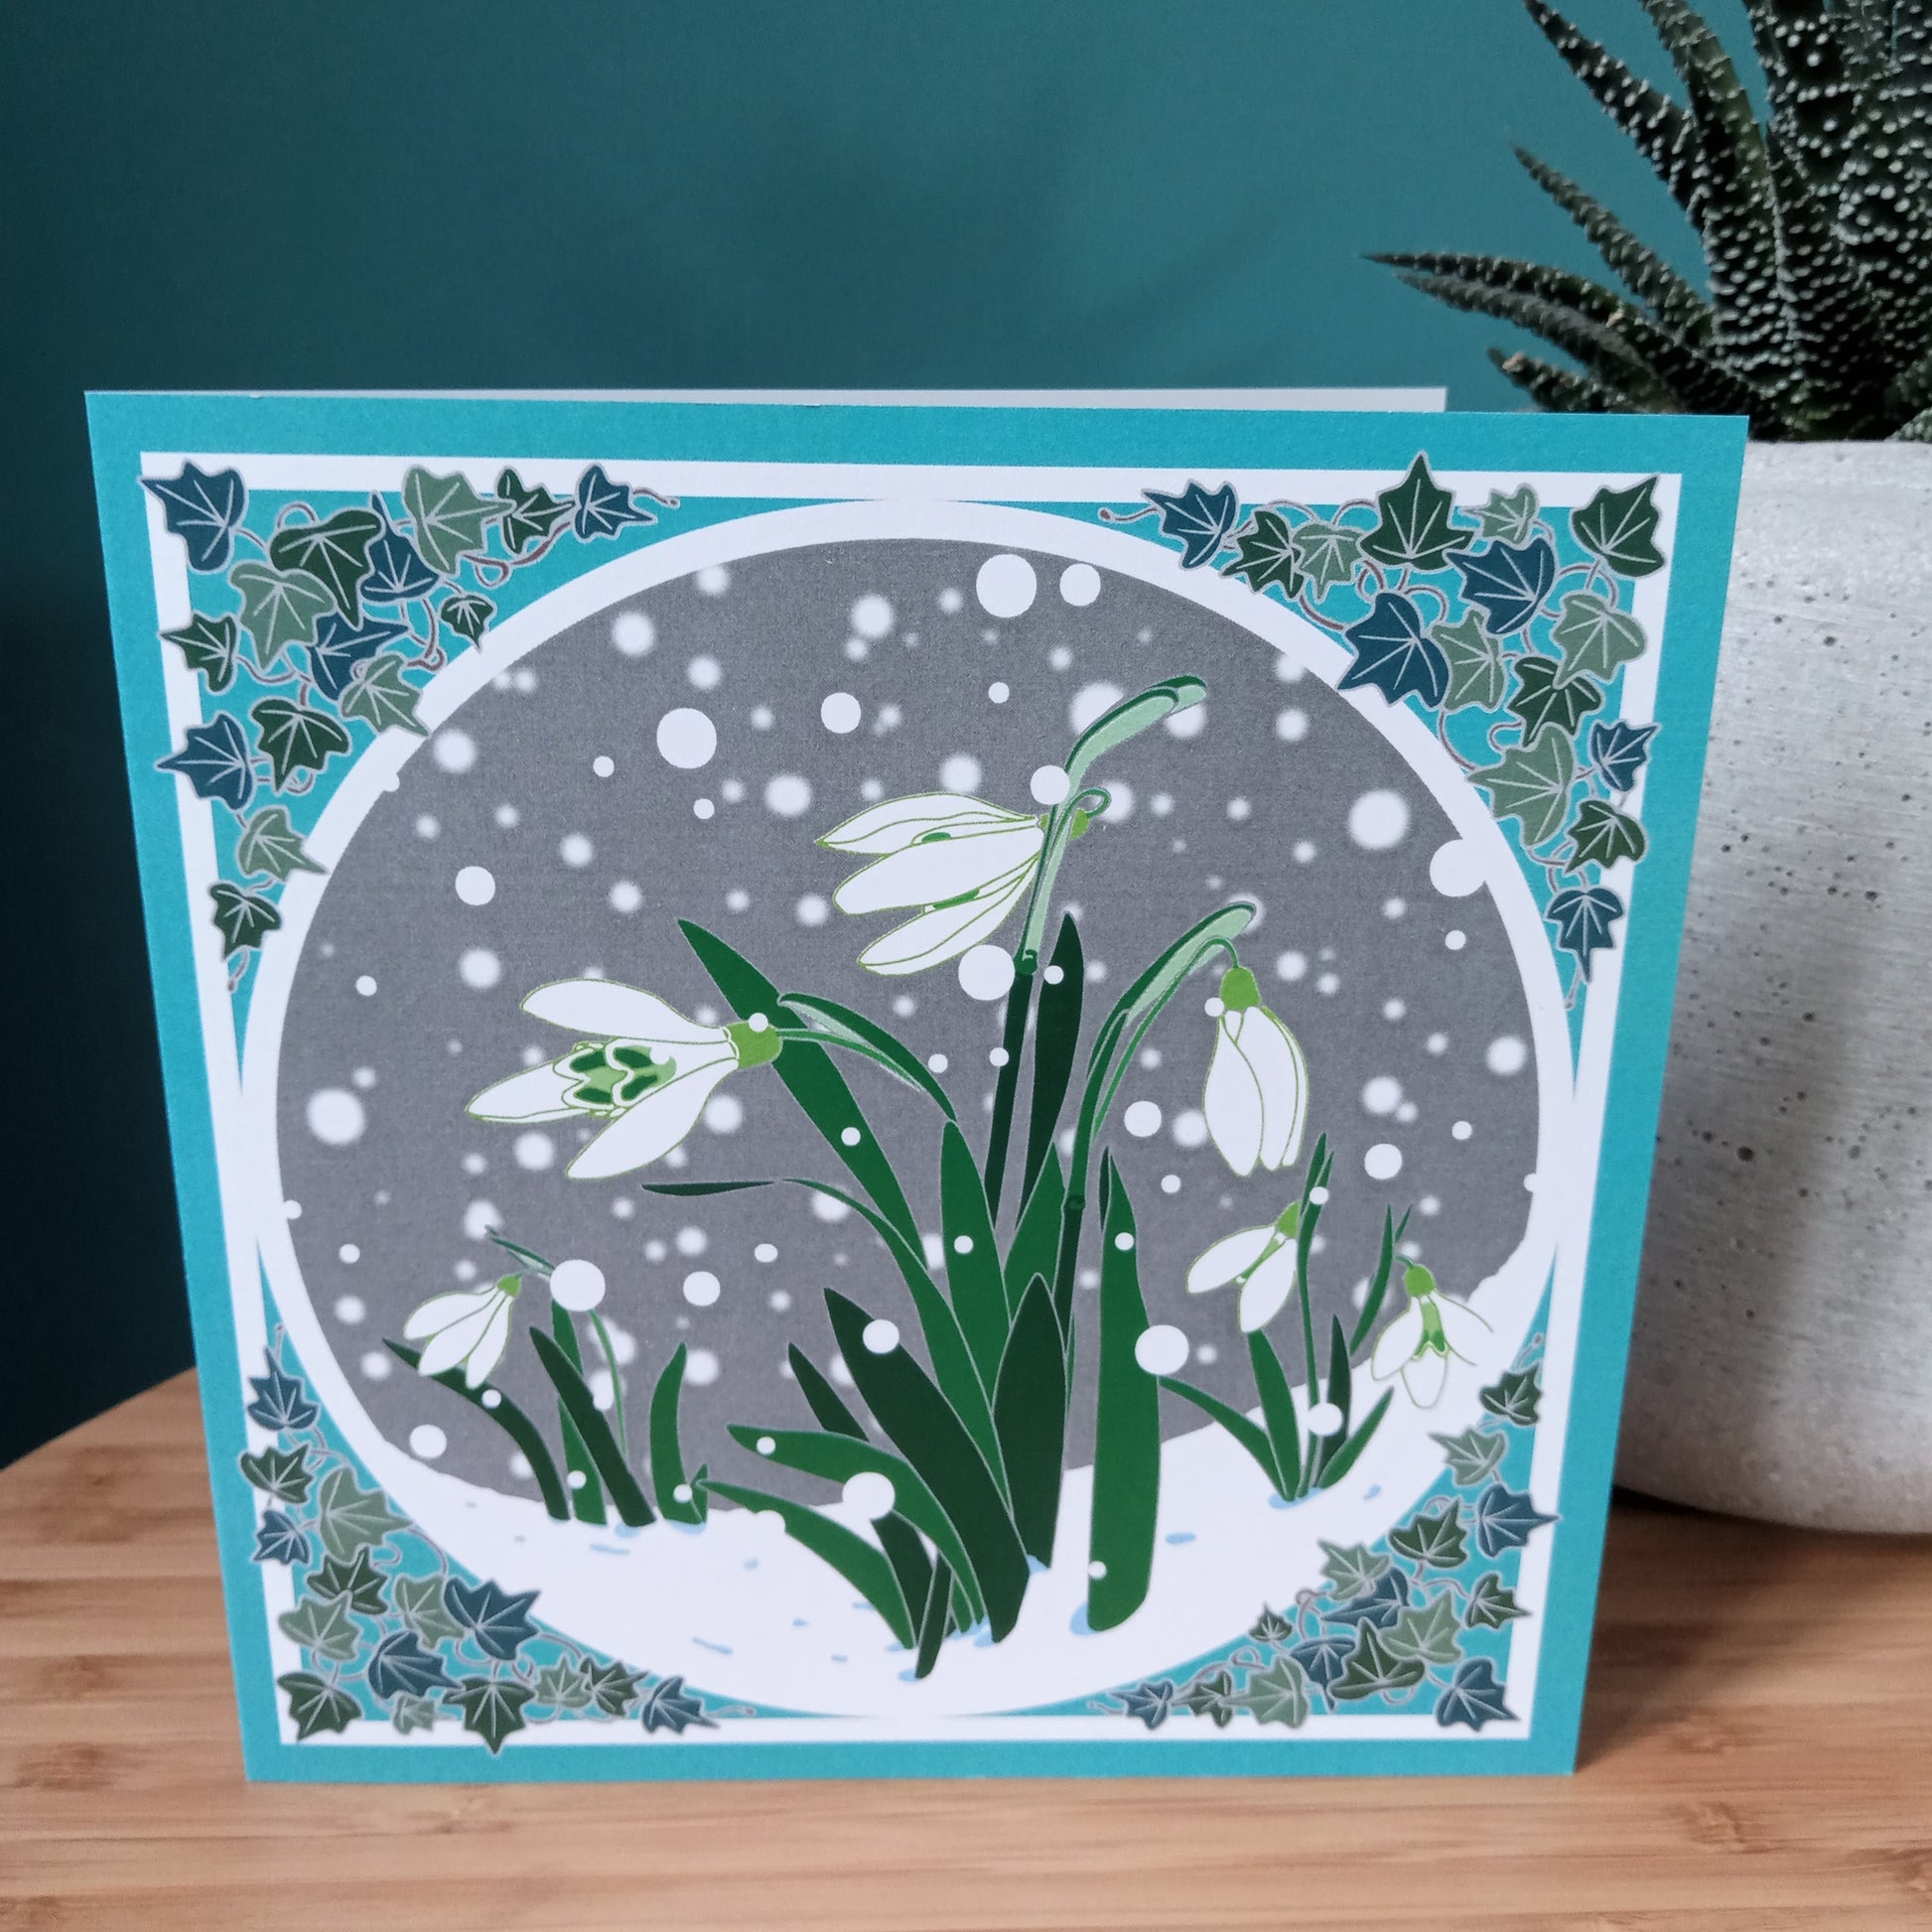 Snowdrops With Ivy Umbellifer Charity Christmas Card